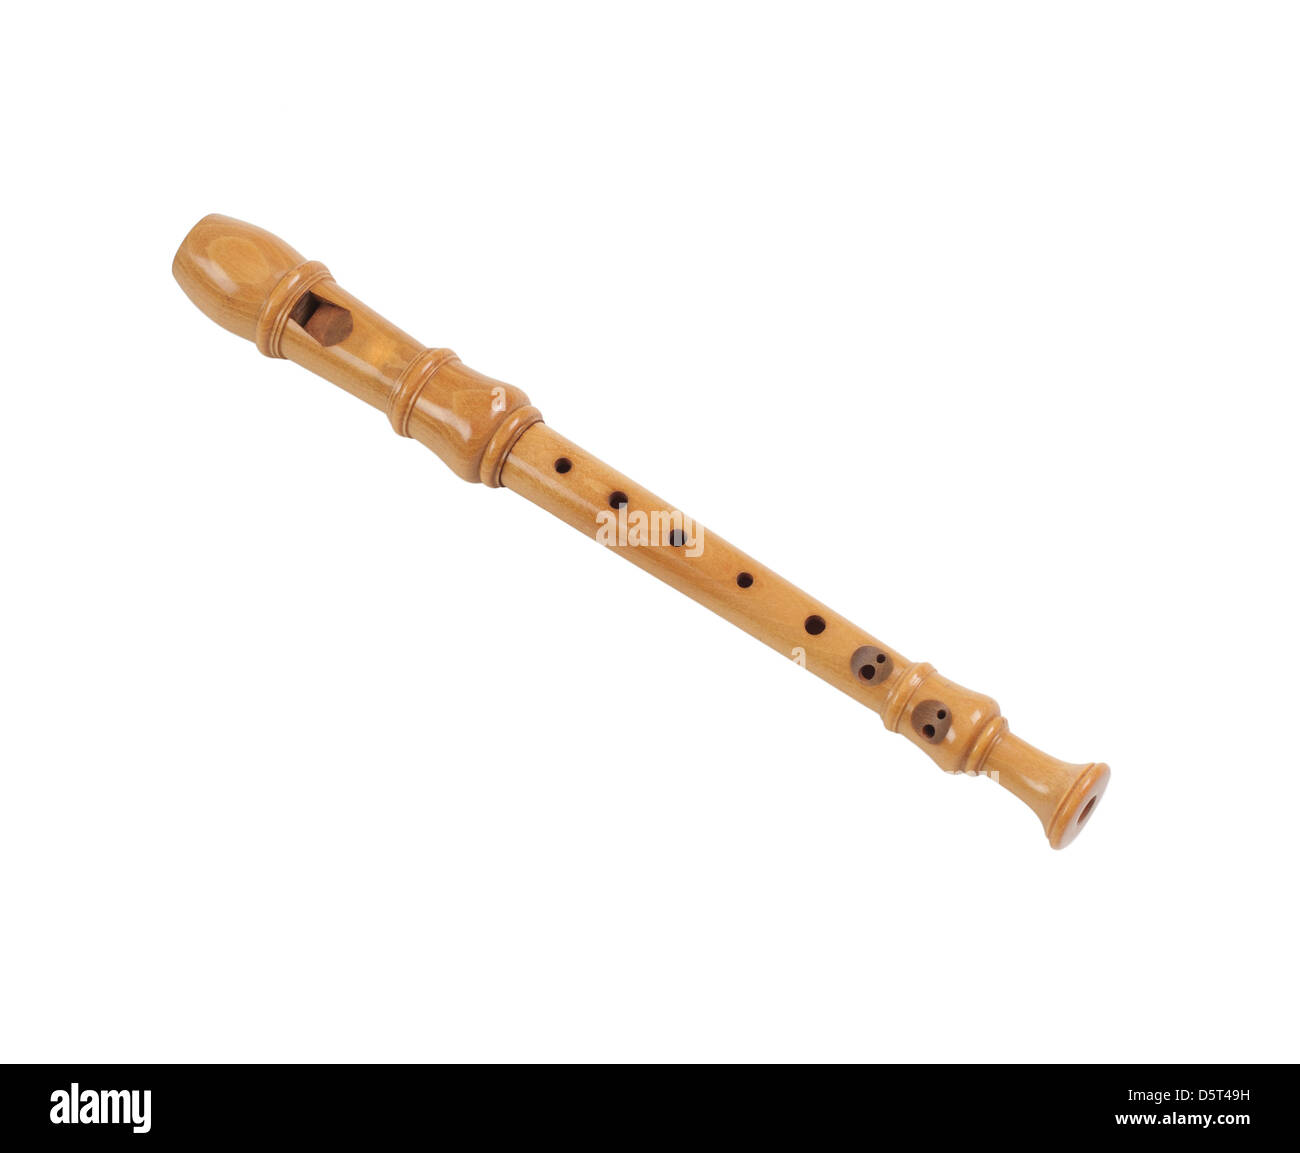 Sweet sound from the nature, wooden recorder music instrument Stock Photo